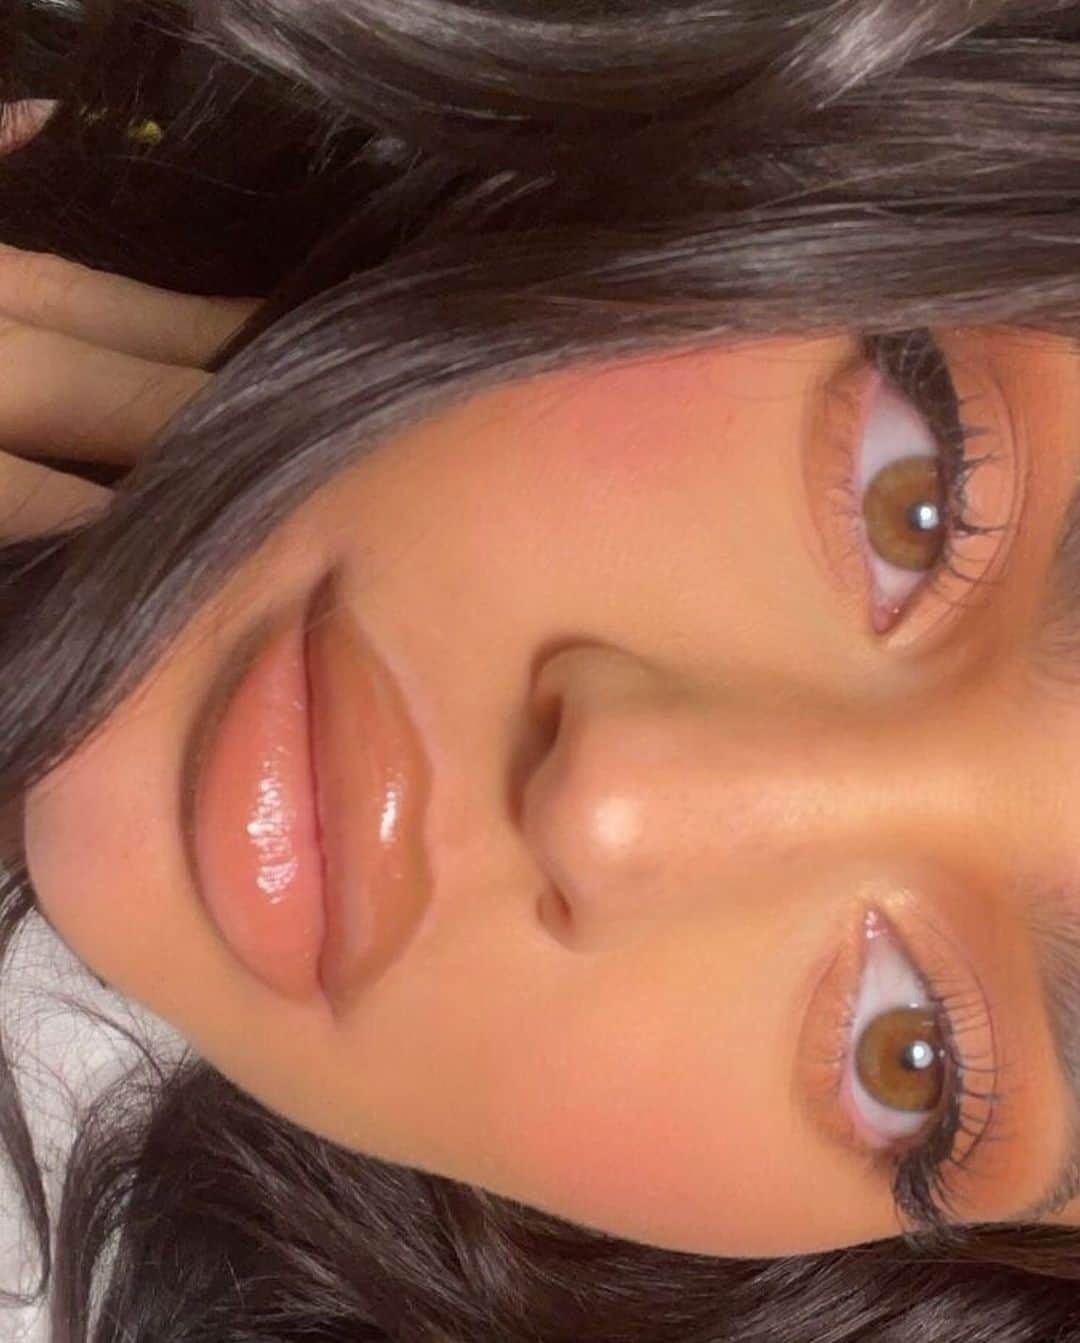 Kylie Cosmeticsのインスタグラム：「boss bae @kyliejenner showing off her favorite lippies 💋 these shades compliment any look from your everyday makeup to full glam! grab them now on kyliecosmetics.com 💗 ⁠⁠ ⁠⁠ shades shown:⁠⁠ ✨ stuck on you high gloss ⁠⁠ ✨ @ultabeauty lip kit in the shade ulta beauty⁠⁠ ✨ bite me matte lip kit ⁠⁠ ✨ extraordinary matte lip kit ⁠⁠ ✨ kristen matte lip kit」